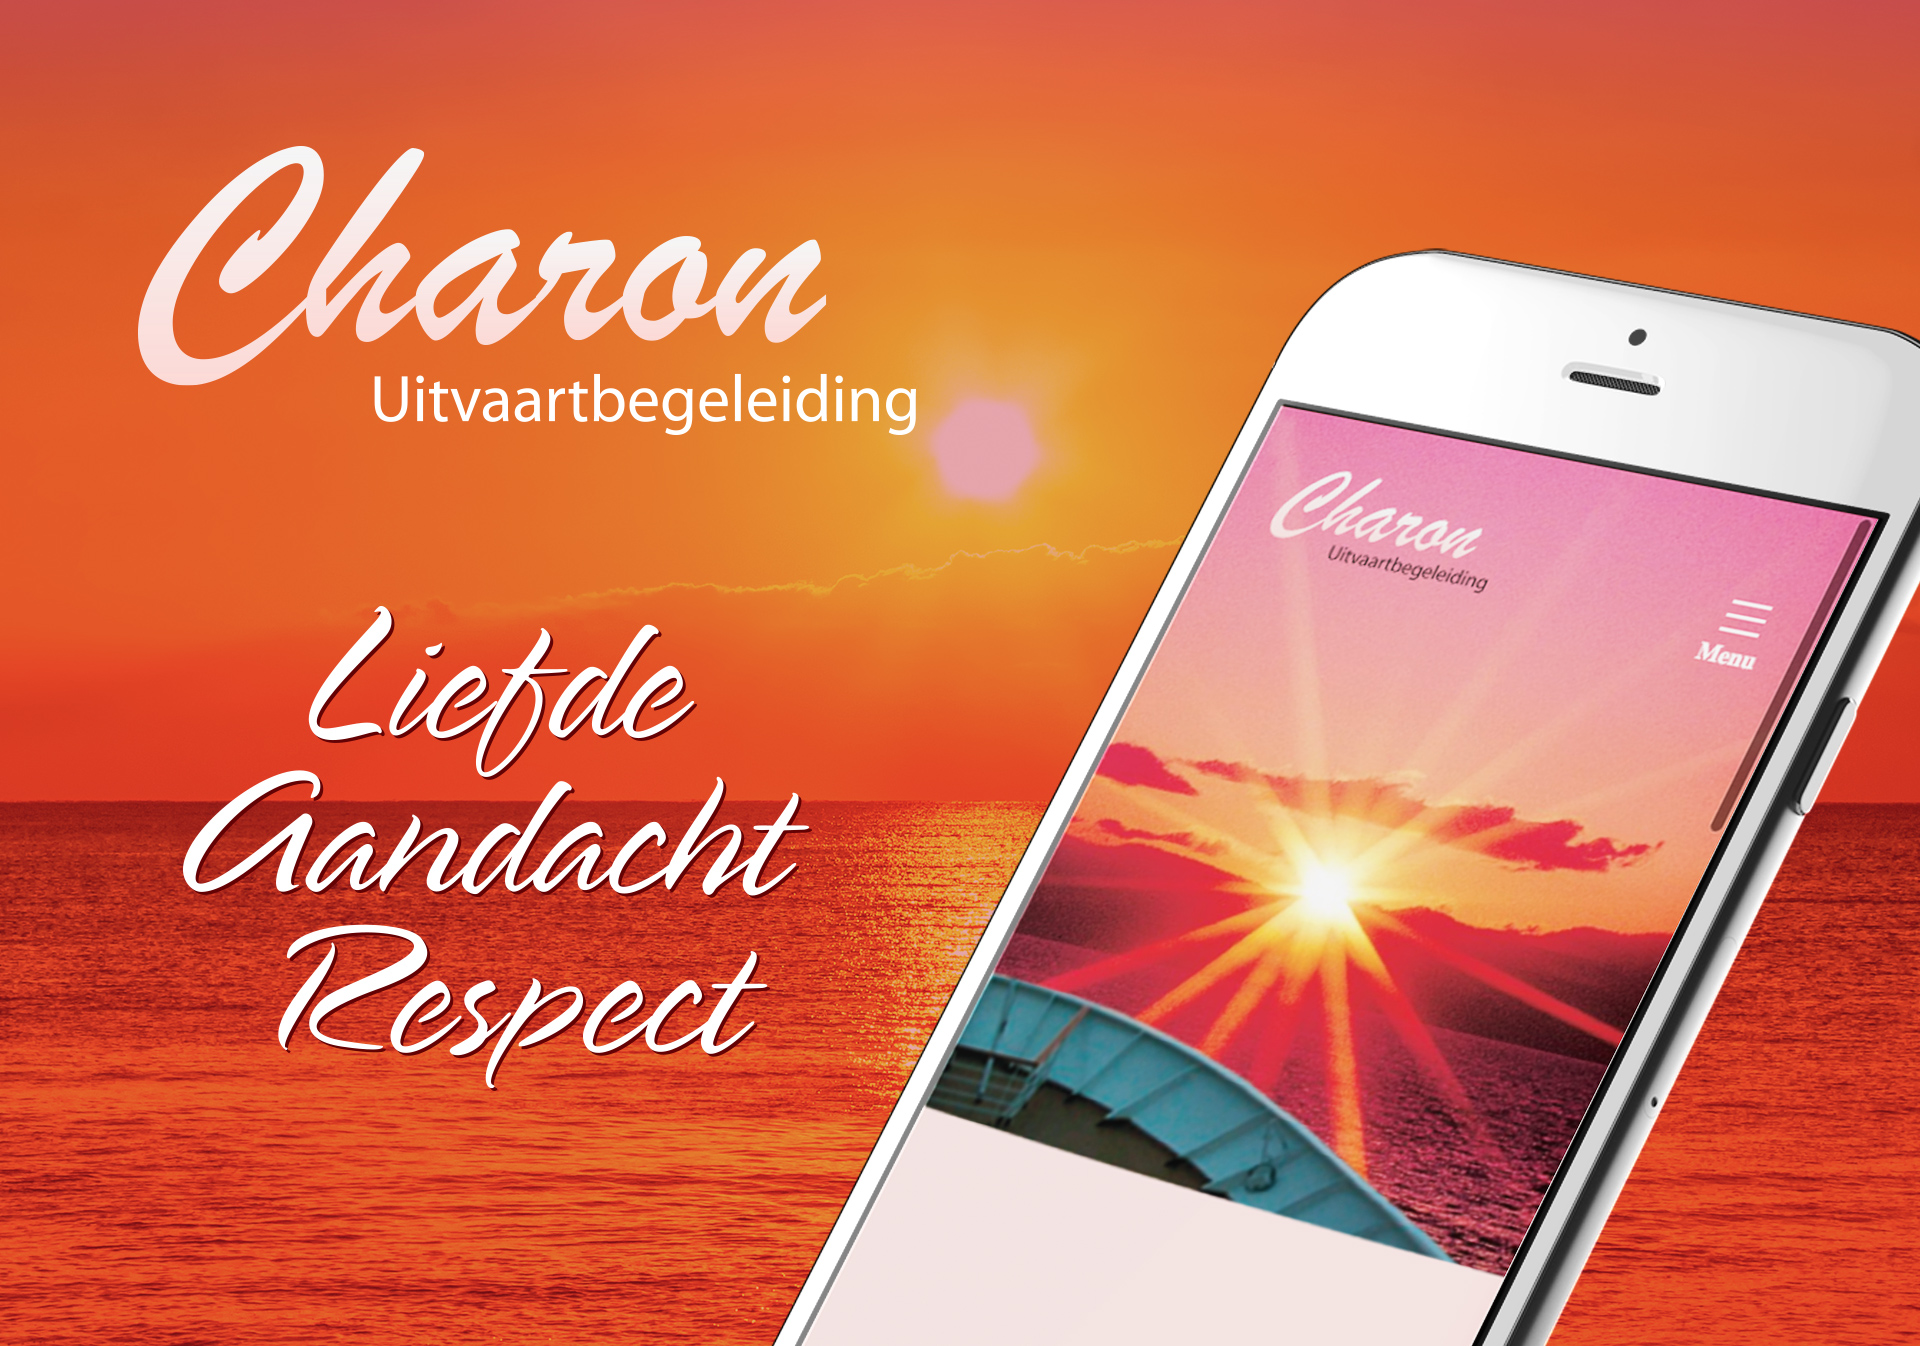 featured charon